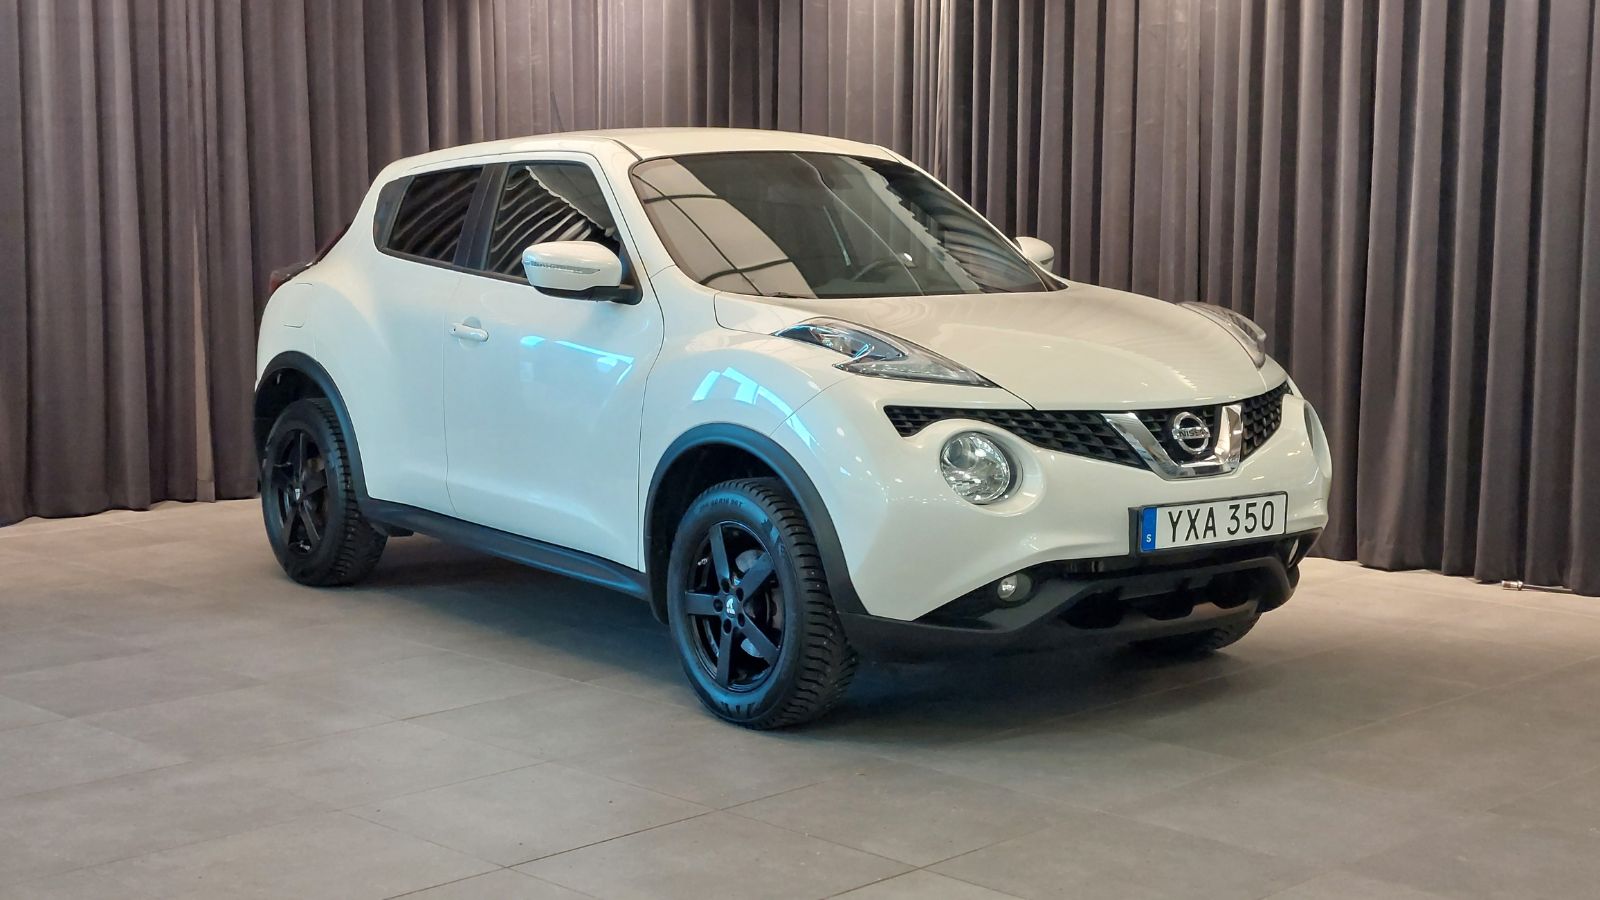 <p>The Nissan Juke is a quirky, stand-out mini SUV that’s affordable and widely available. However, its unconventional design results in limited rear seat space and compromised visibility, making parking dings and bumper dents a common feature of second-hand examples. They also have unreliable transmissions, electrical faults, and glitchy infotainment systems.  </p>